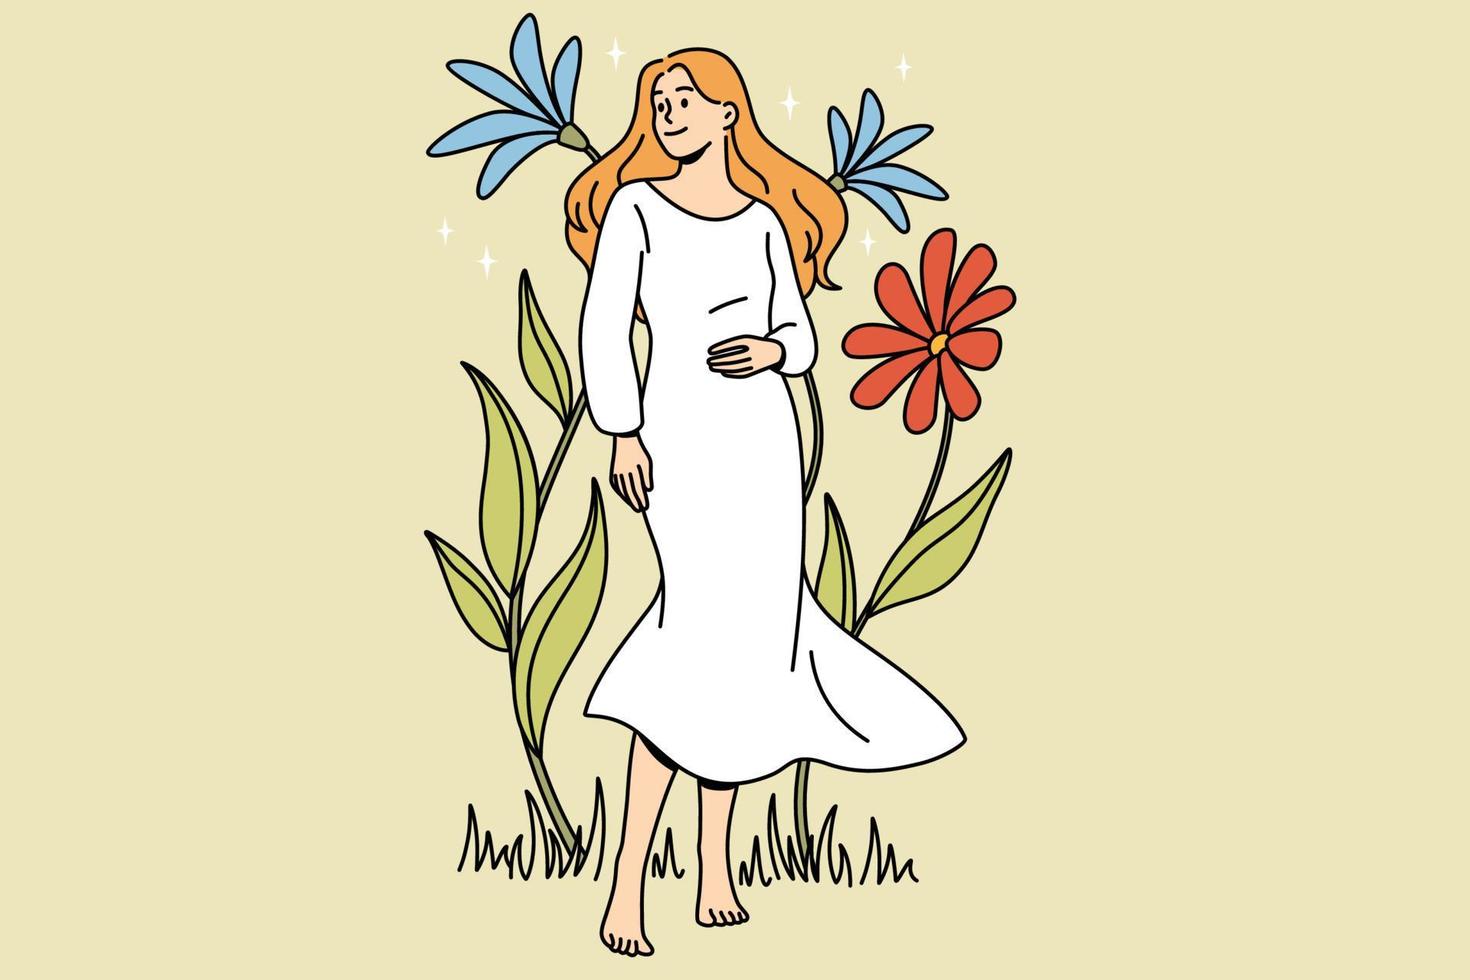 Natural beauty and nature concept. Young smiling blonde woman in white dress barefoot standing between blooming colorful flowers vector illustration